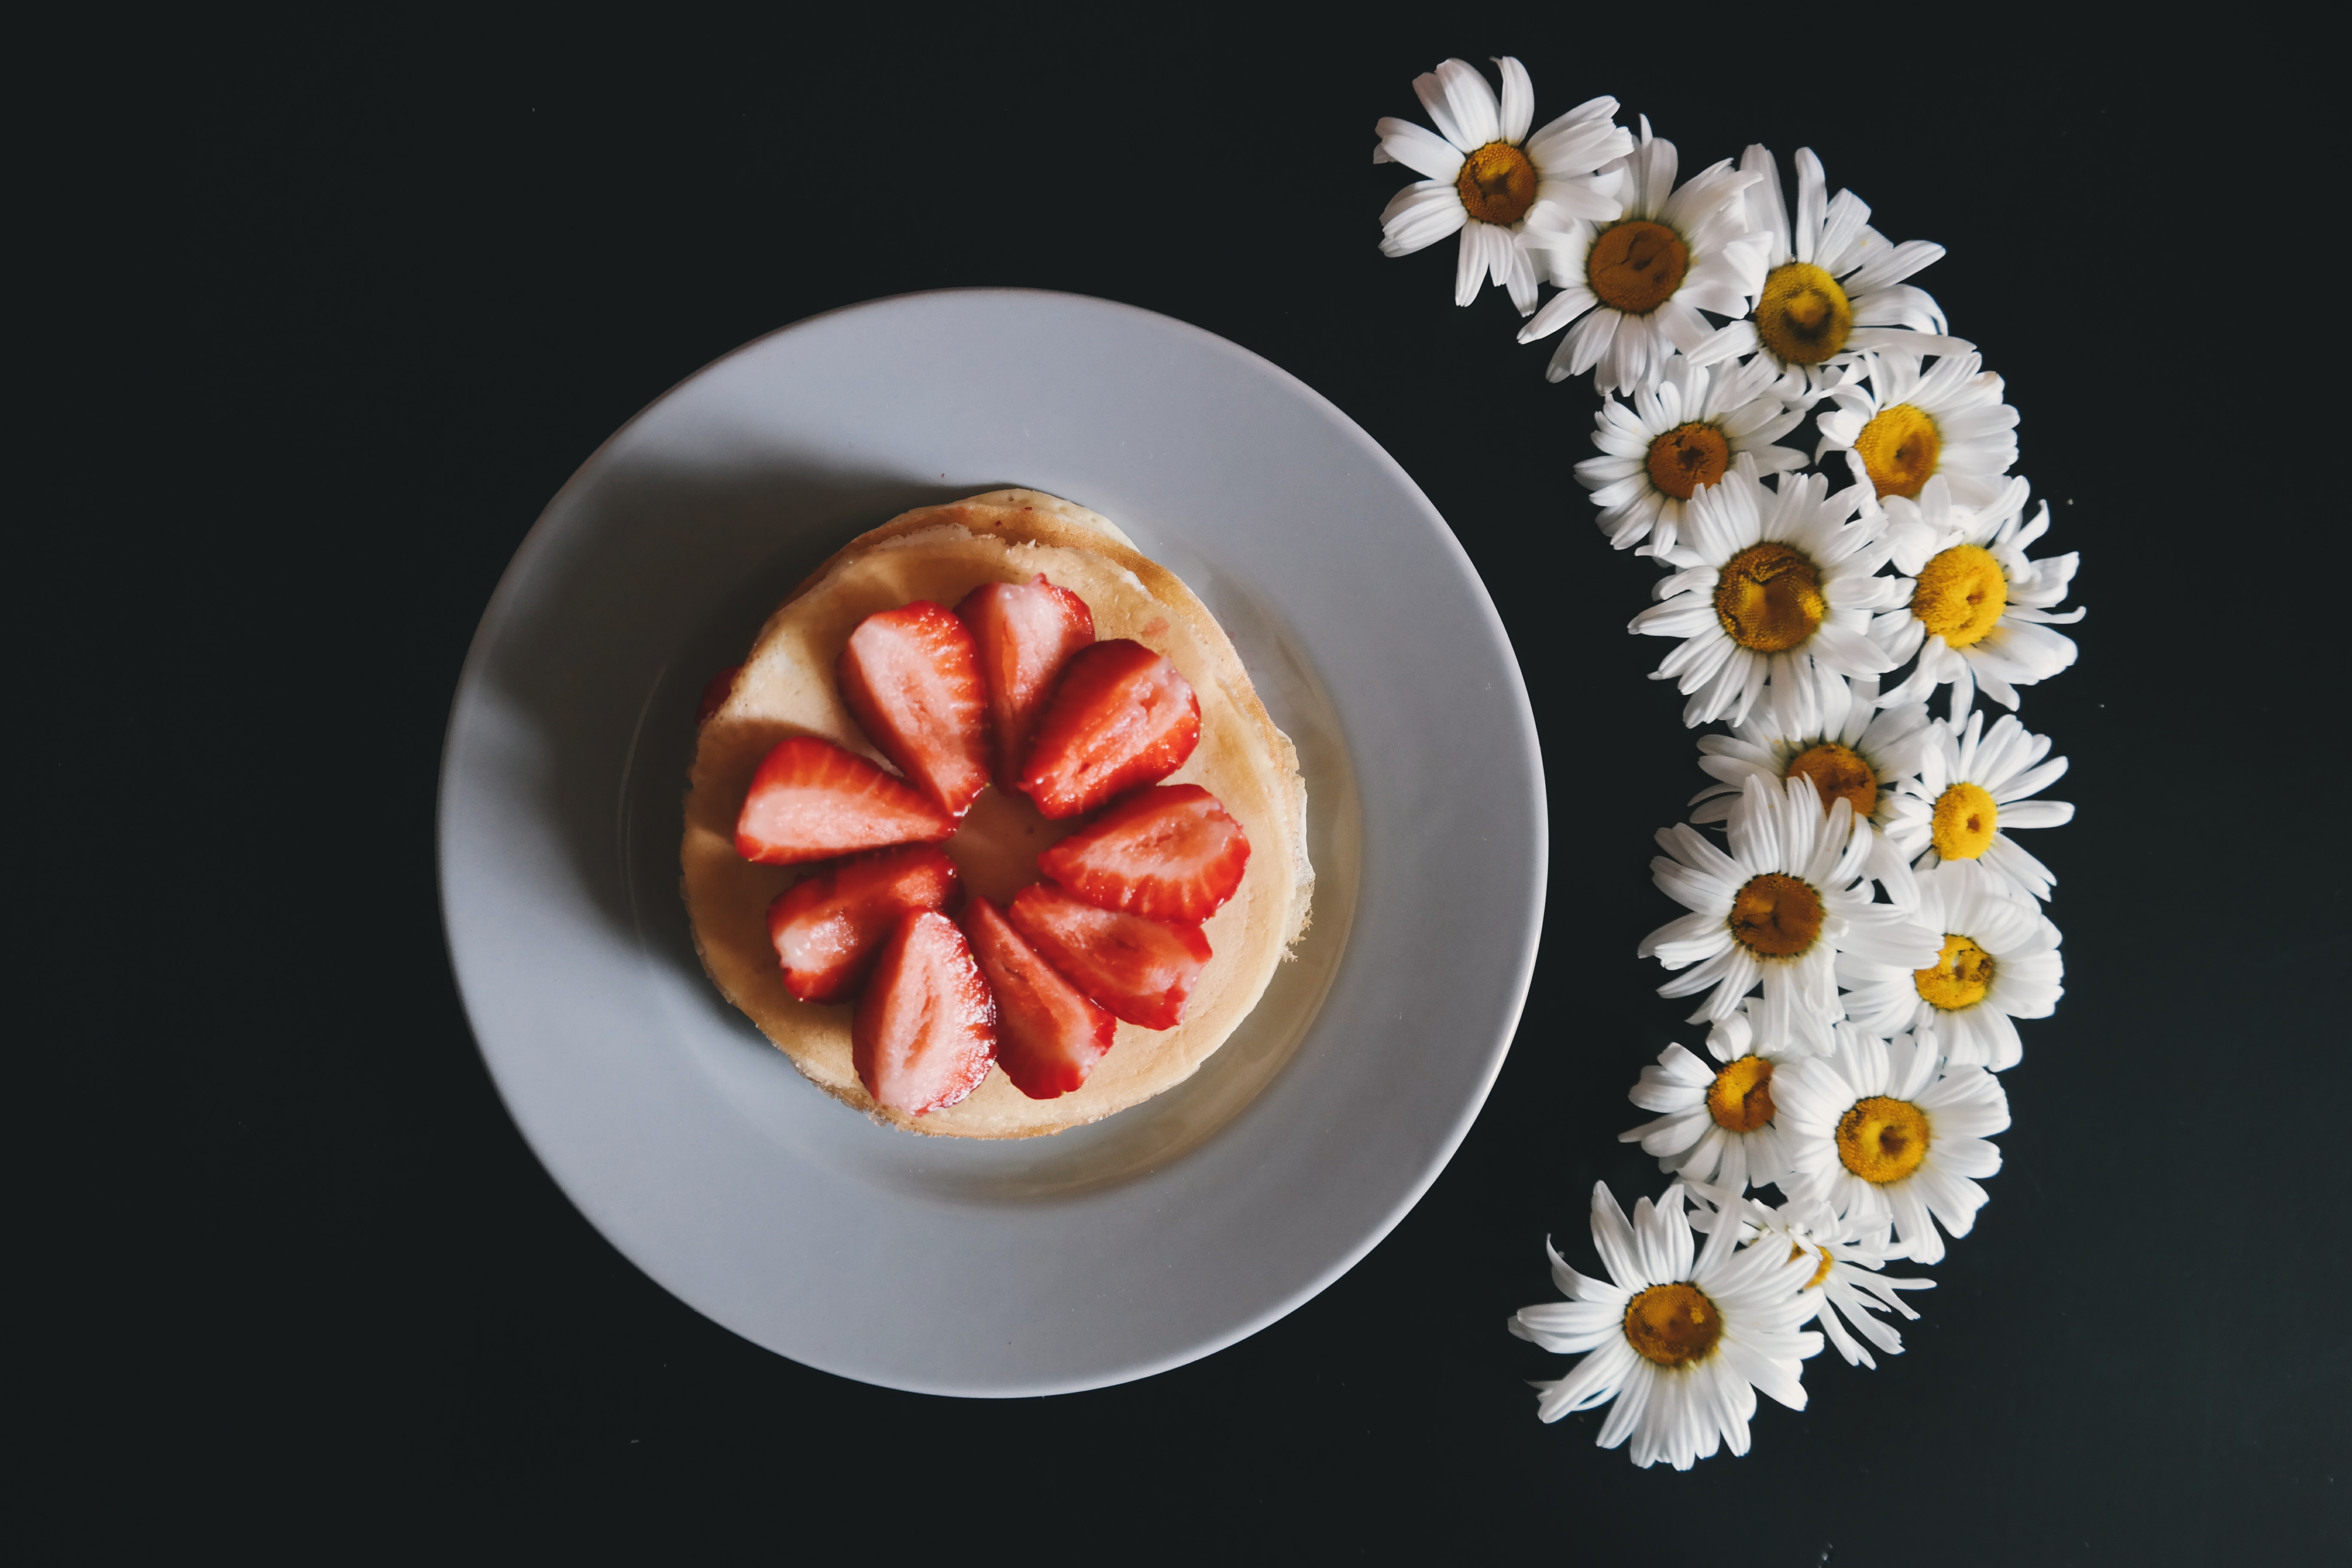 pancake topped with strawberry slices on white ceramic plate near bunch of white flowers